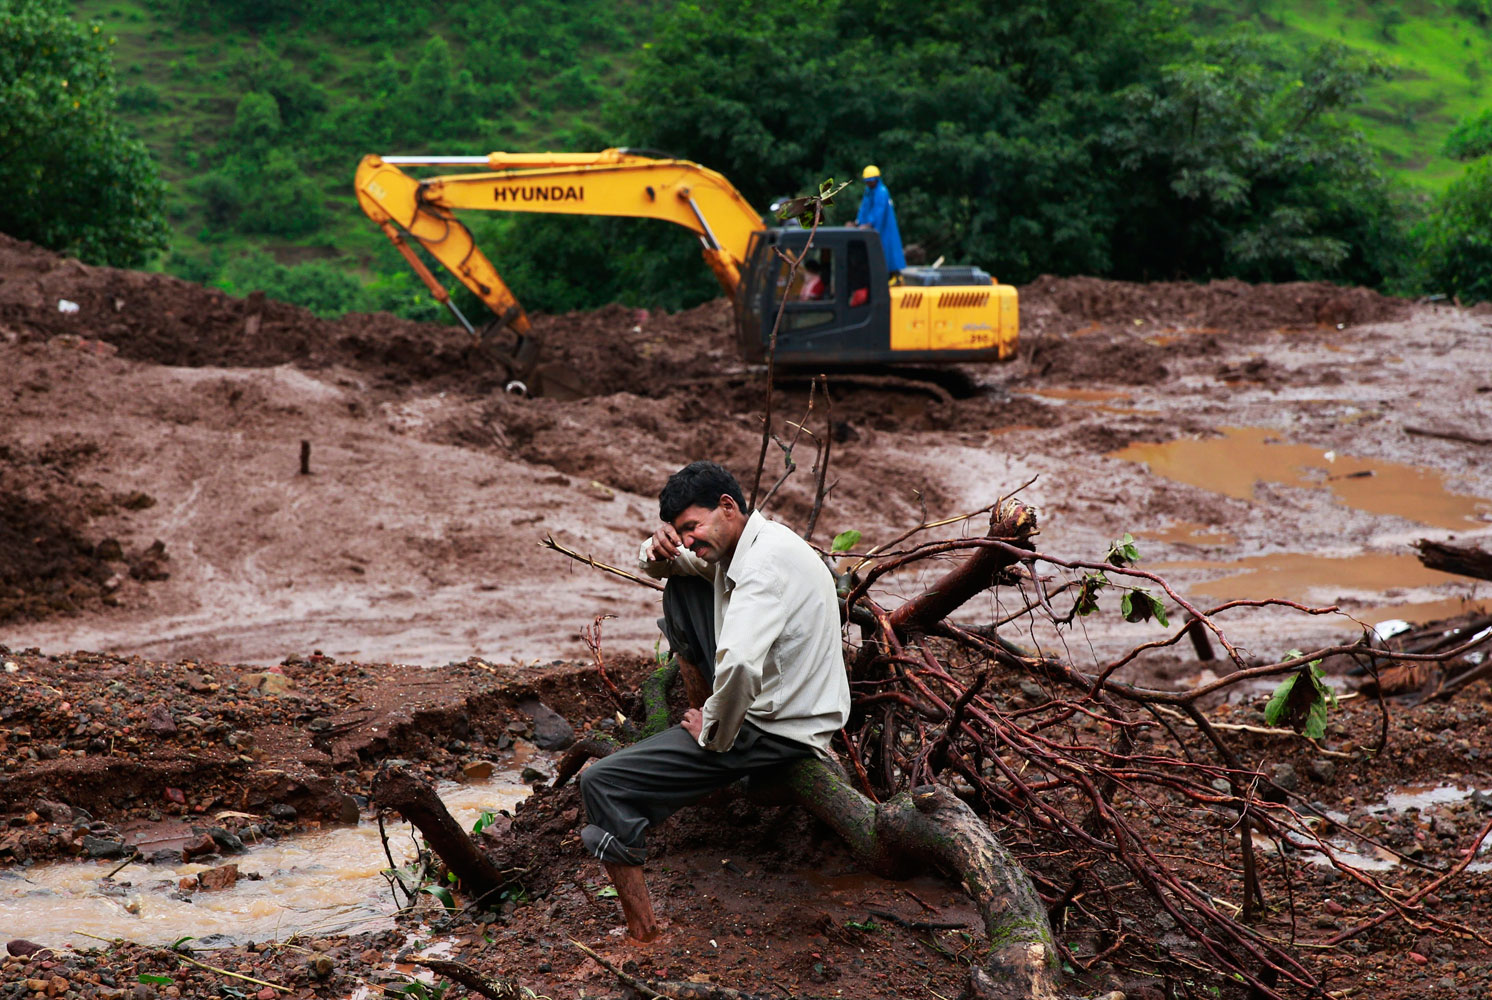 Chandrakant Zanjare, who said he lost 13 family members to a landslide, wails near the site where his house stood in Malin village, in the western Indian state of Maharashtra on Aug. 1, 2014.